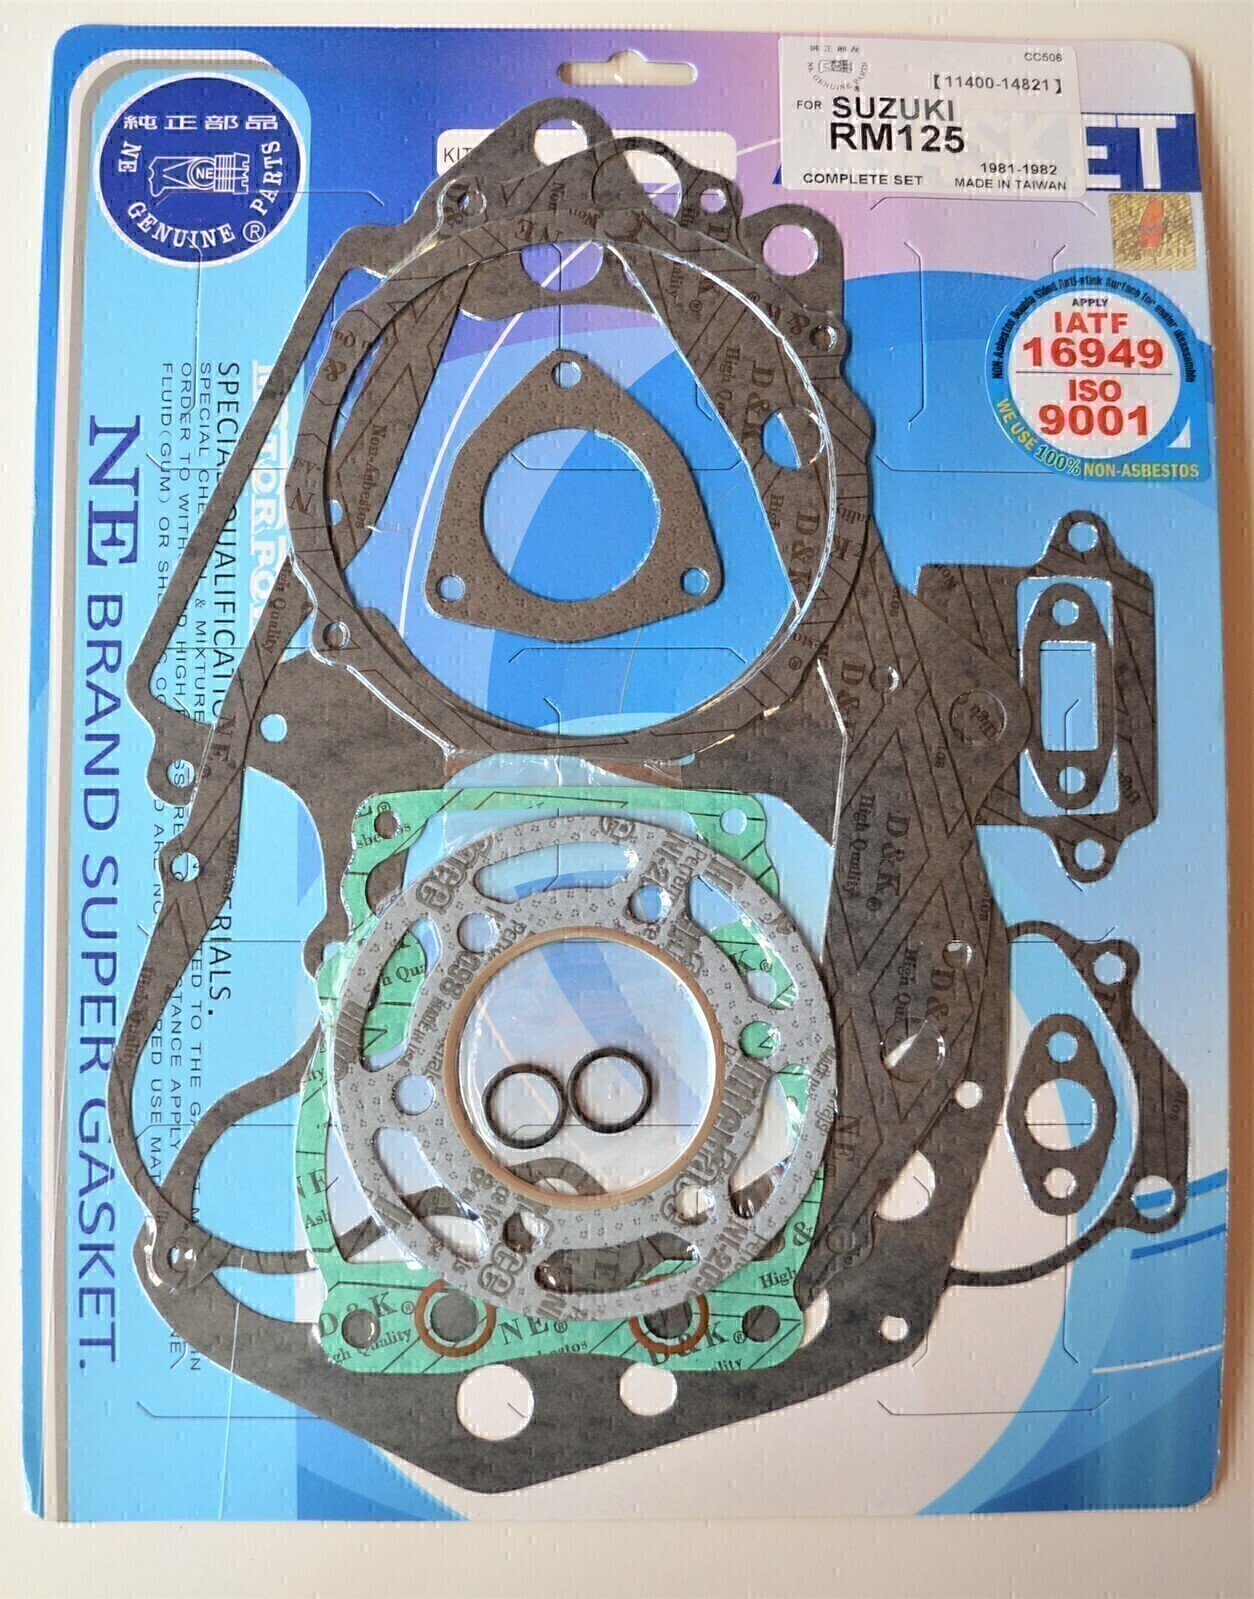 COMPLETE GASKET KIT FOR SUZUKI RM125 RM 125 1981 1982